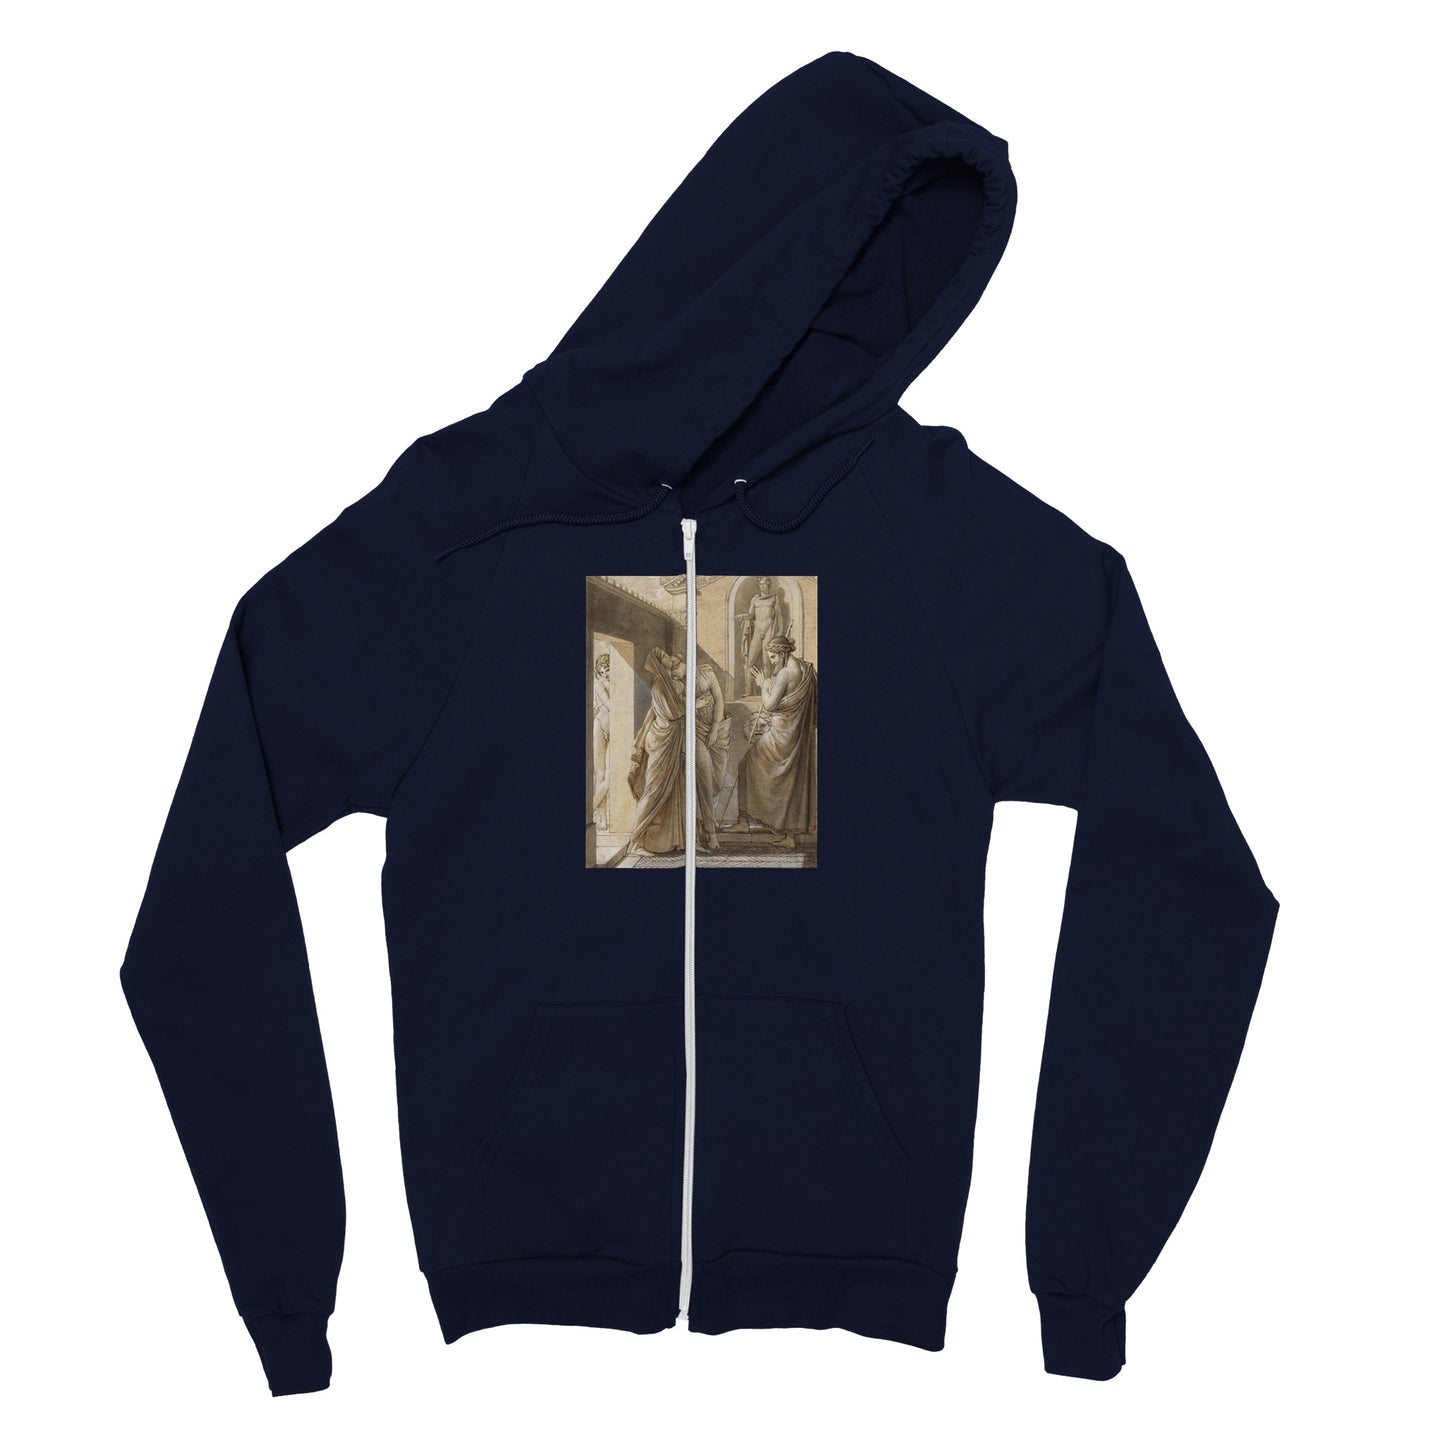 FRANCOIS GERARD - THE FATHER OF PSYCHE CONSULTING THE ORACLE OF APOLLO - UNISEX ZIP HOODIEd65f4f9a-279d-4d50-a601-ef3432f4a036